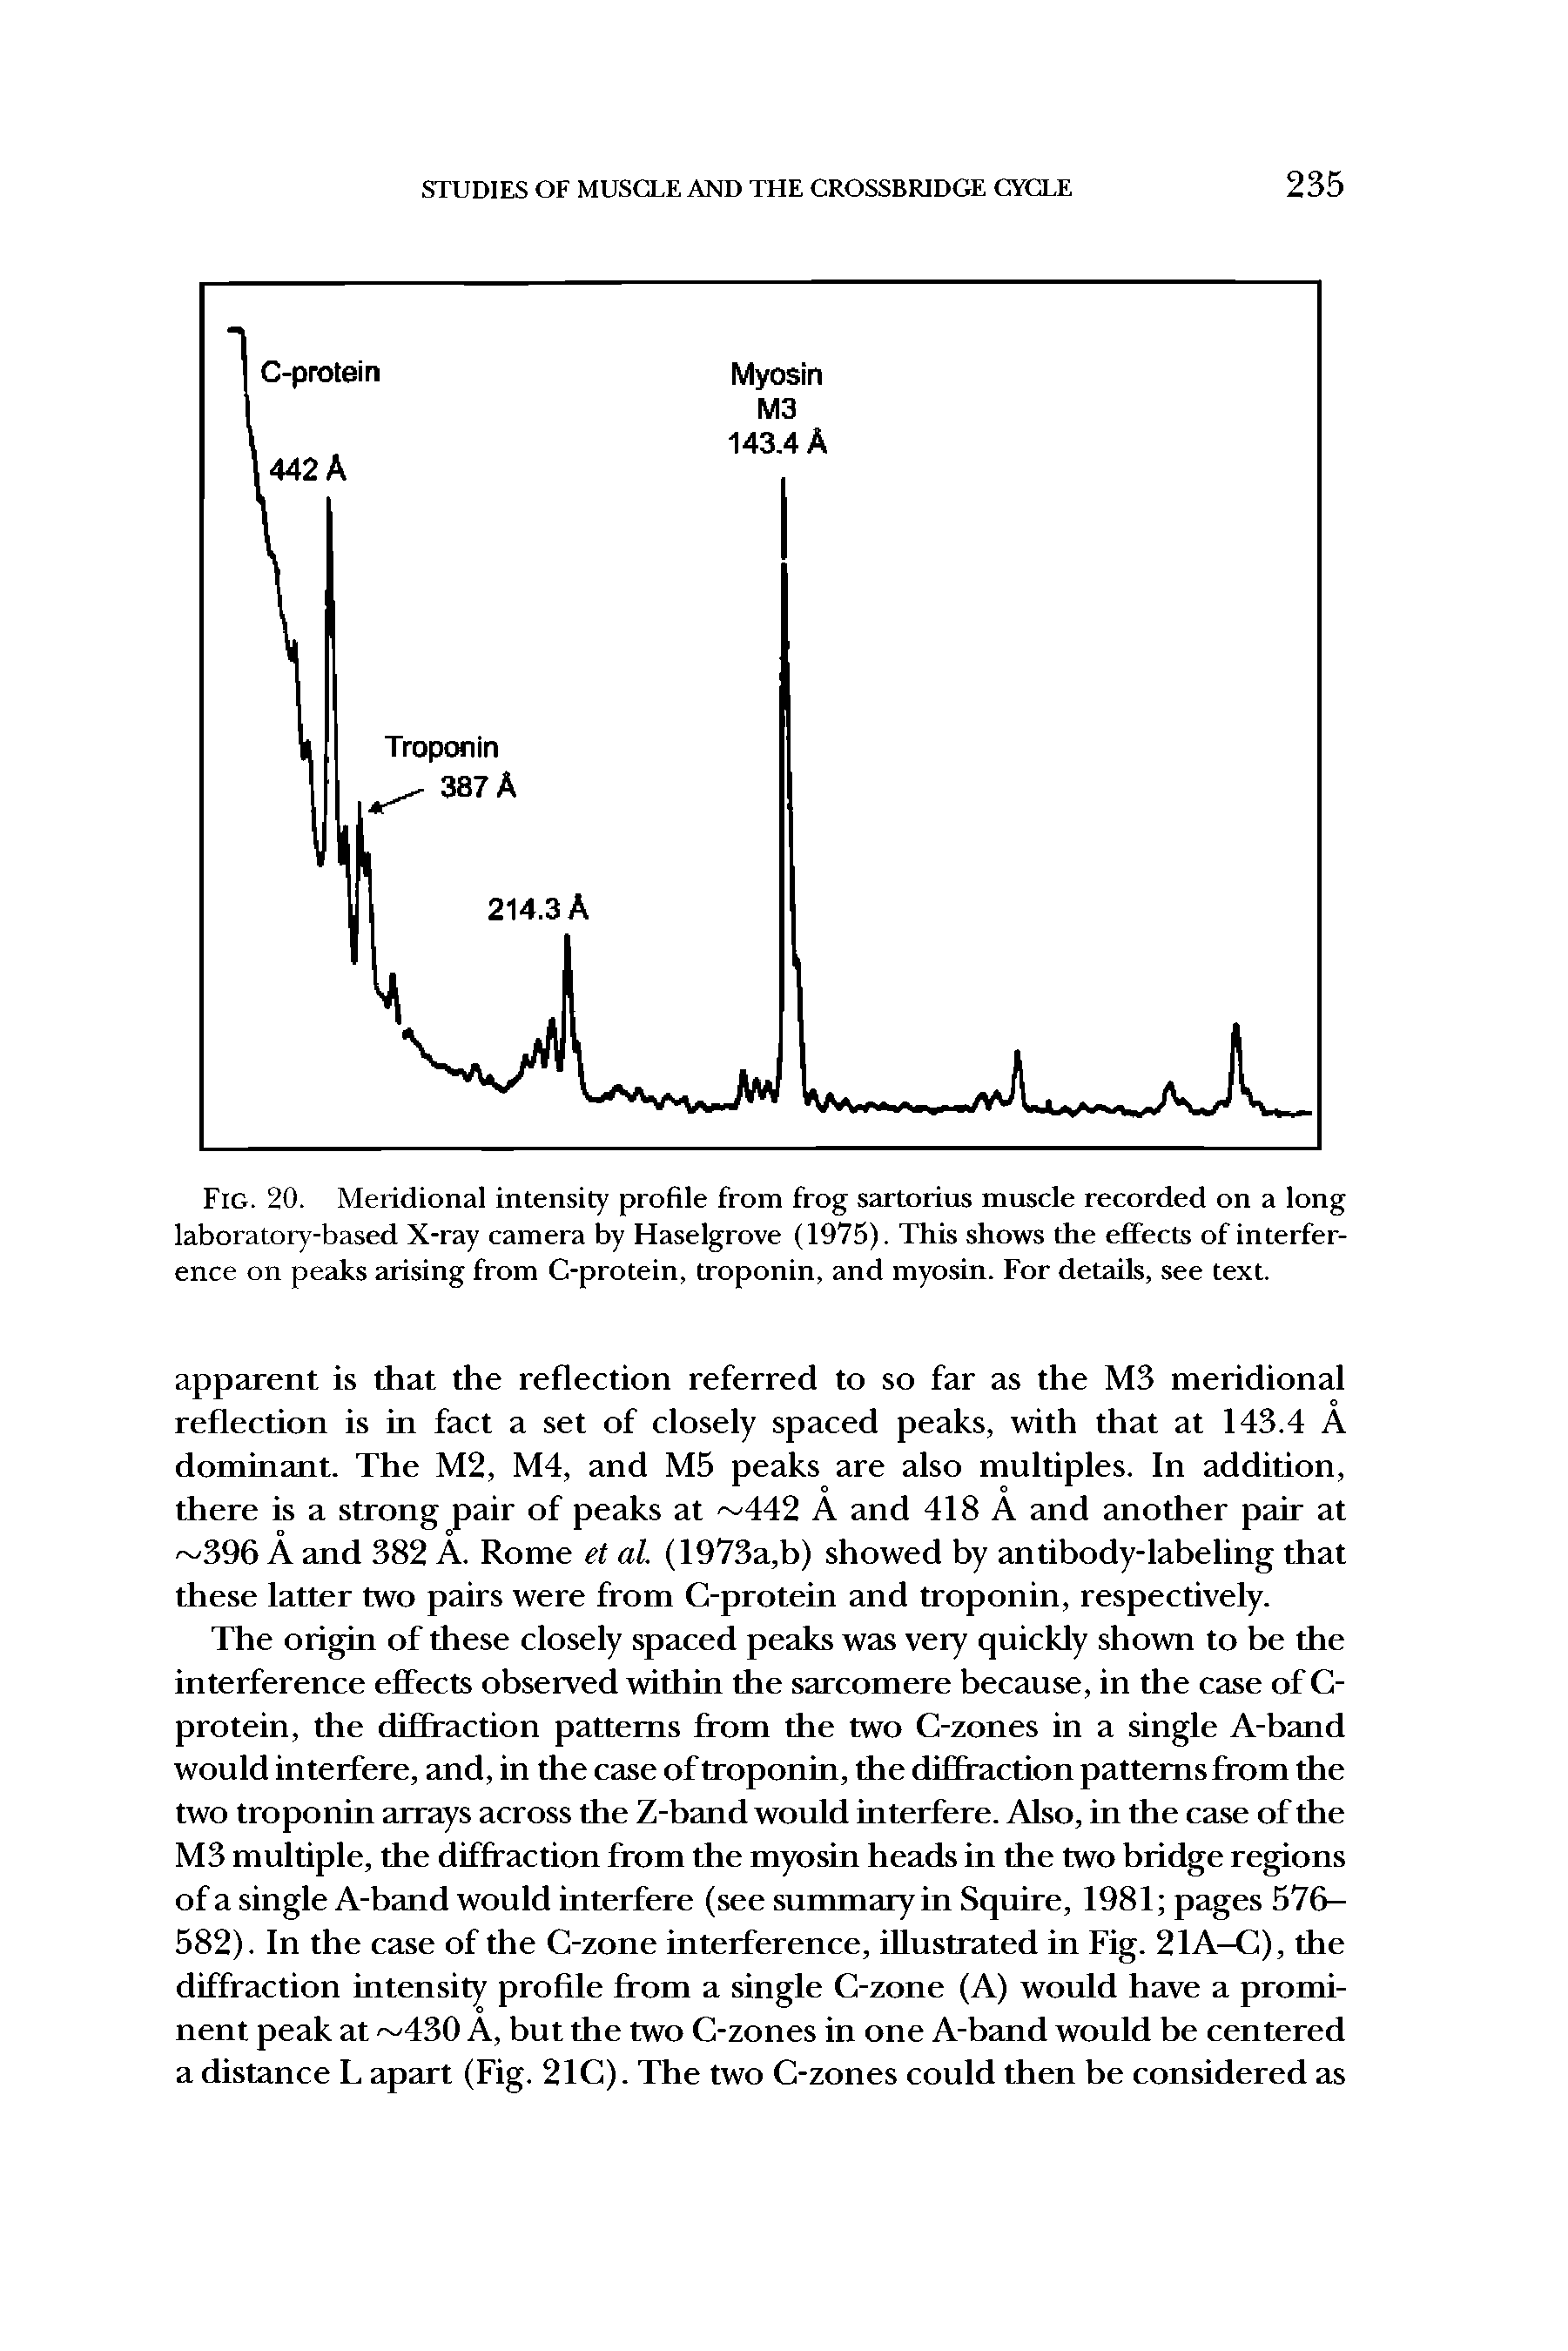 Fig. 20. Meridional intensity profile from frog sartorius muscle recorded on a long laboratory-based X-ray camera by Haselgrove (1975). This shows the effects of interference on peaks arising from C-protein, troponin, and myosin. For details, see text.